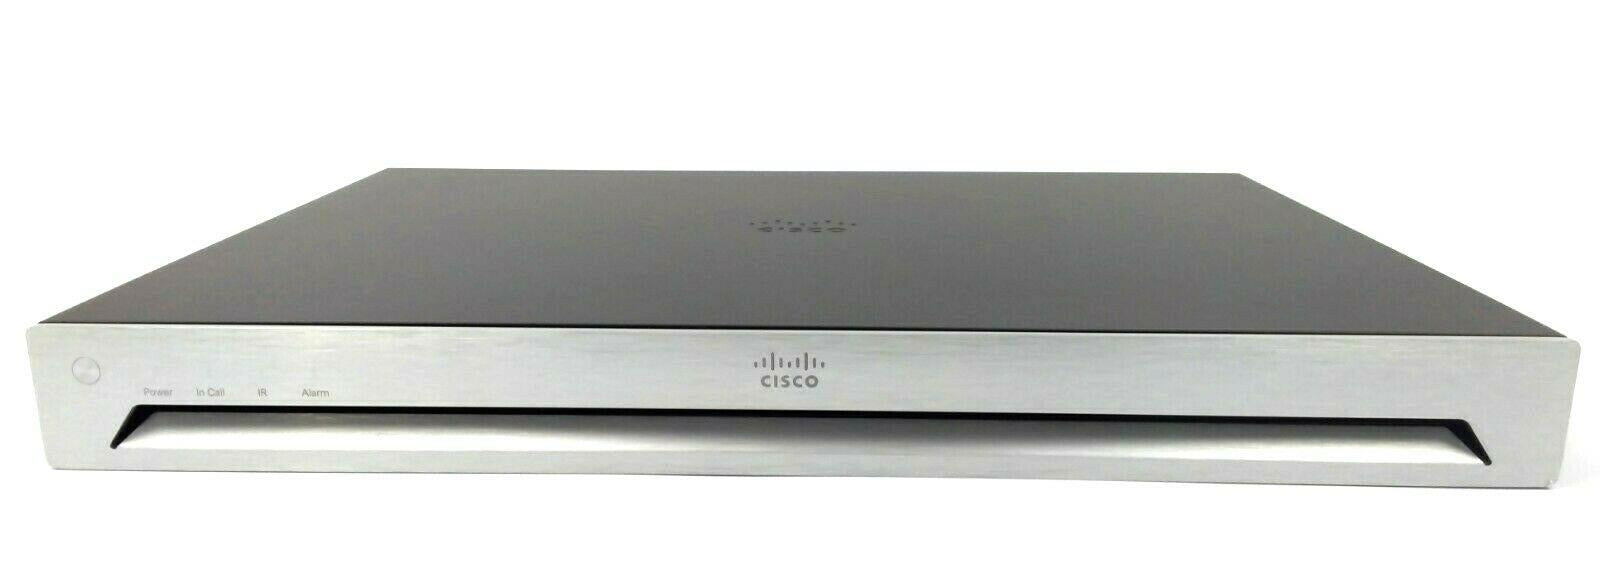 Cisco TelePresence SX80 Codec Point-to-Point Full HD Network Switch CTS-SX80-K9